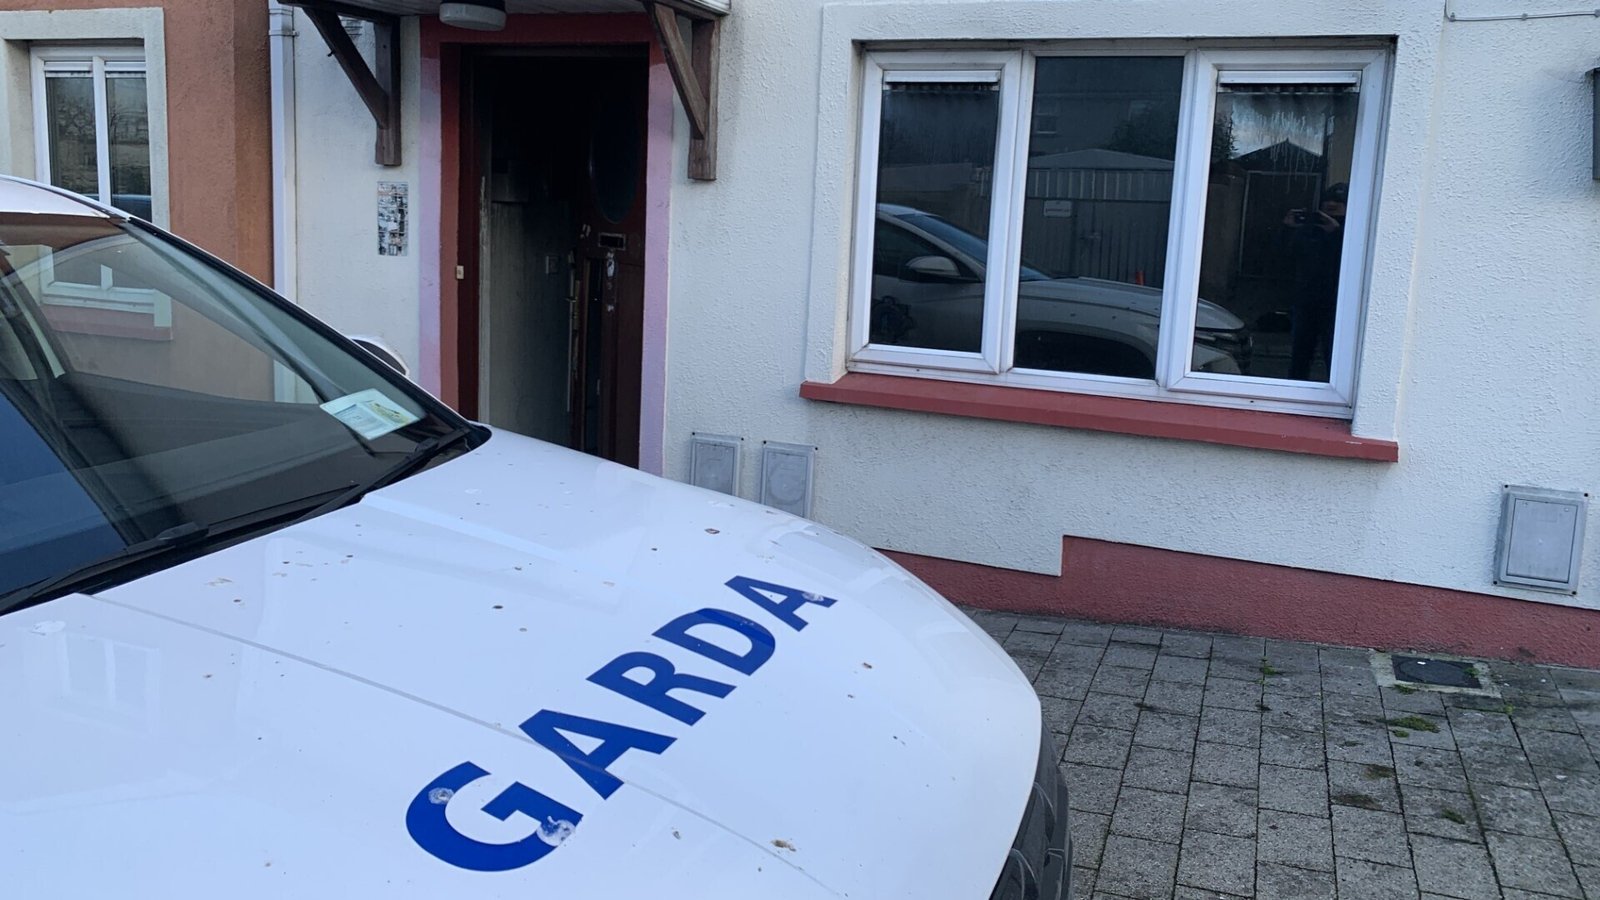 Man who died in Waterford house fire named locally